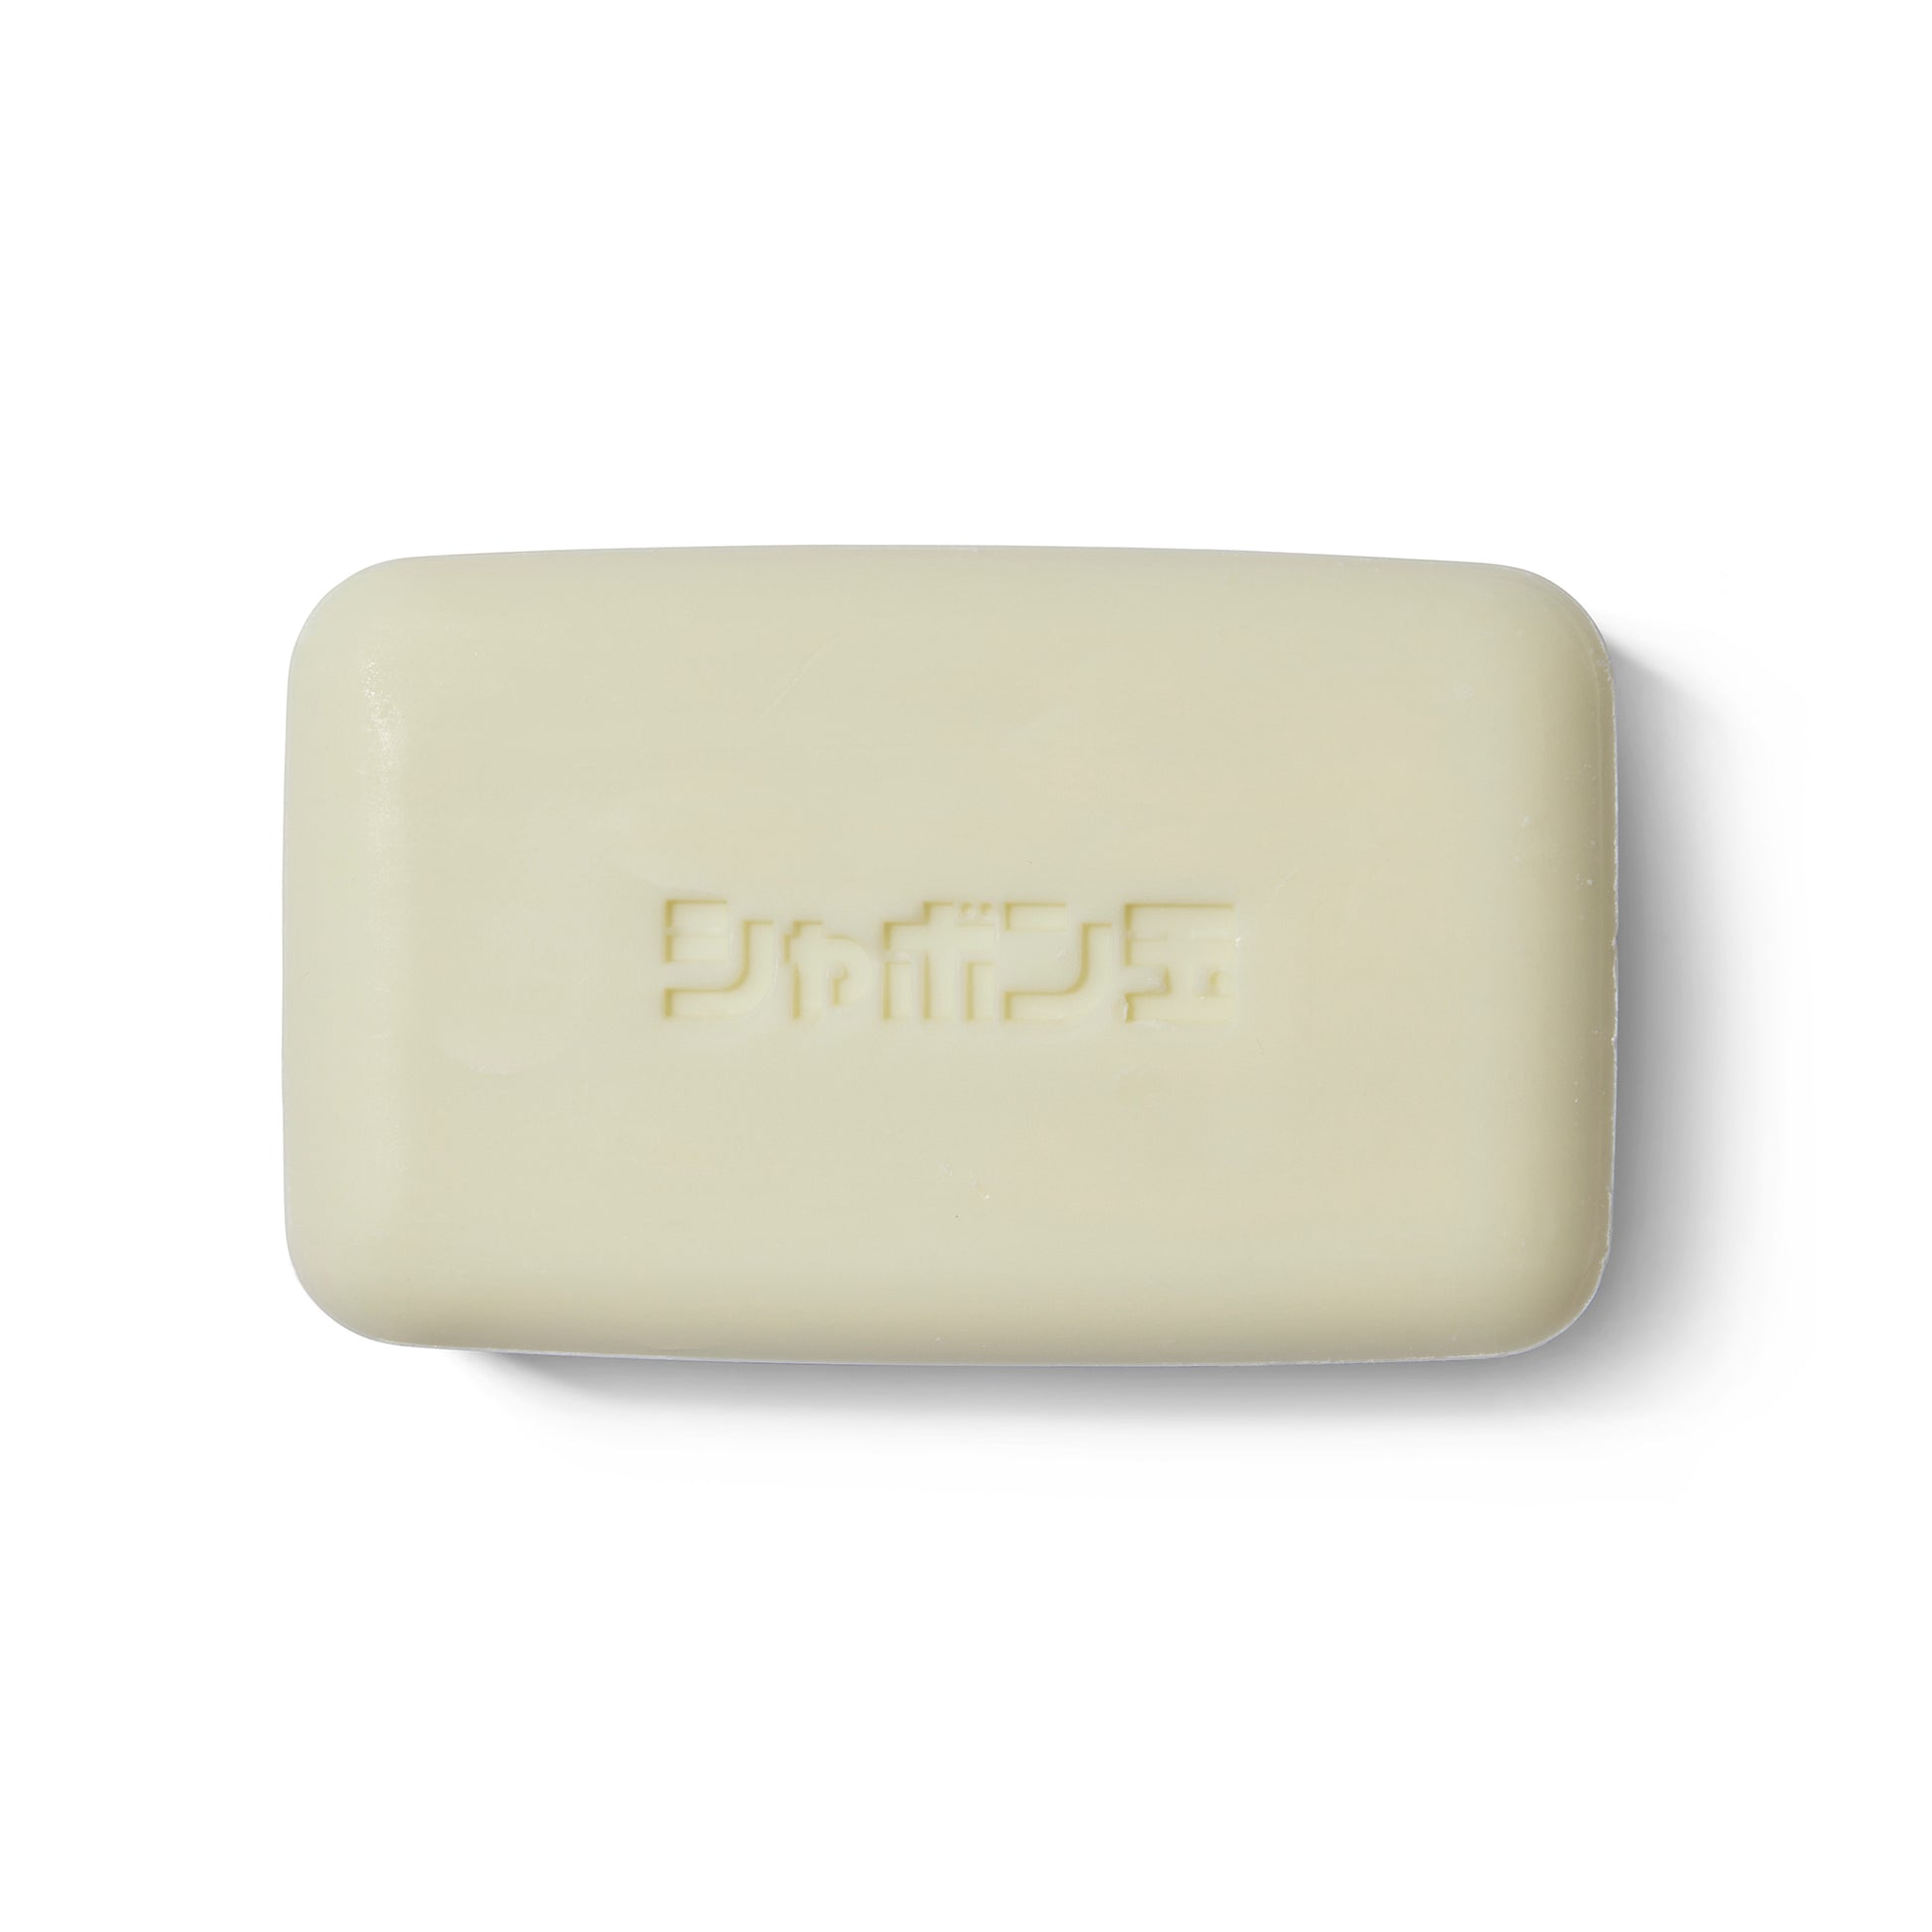 The Takeda Brush Purely Soap out of its outer packaging. There is Japanese writing embossed into the soap.